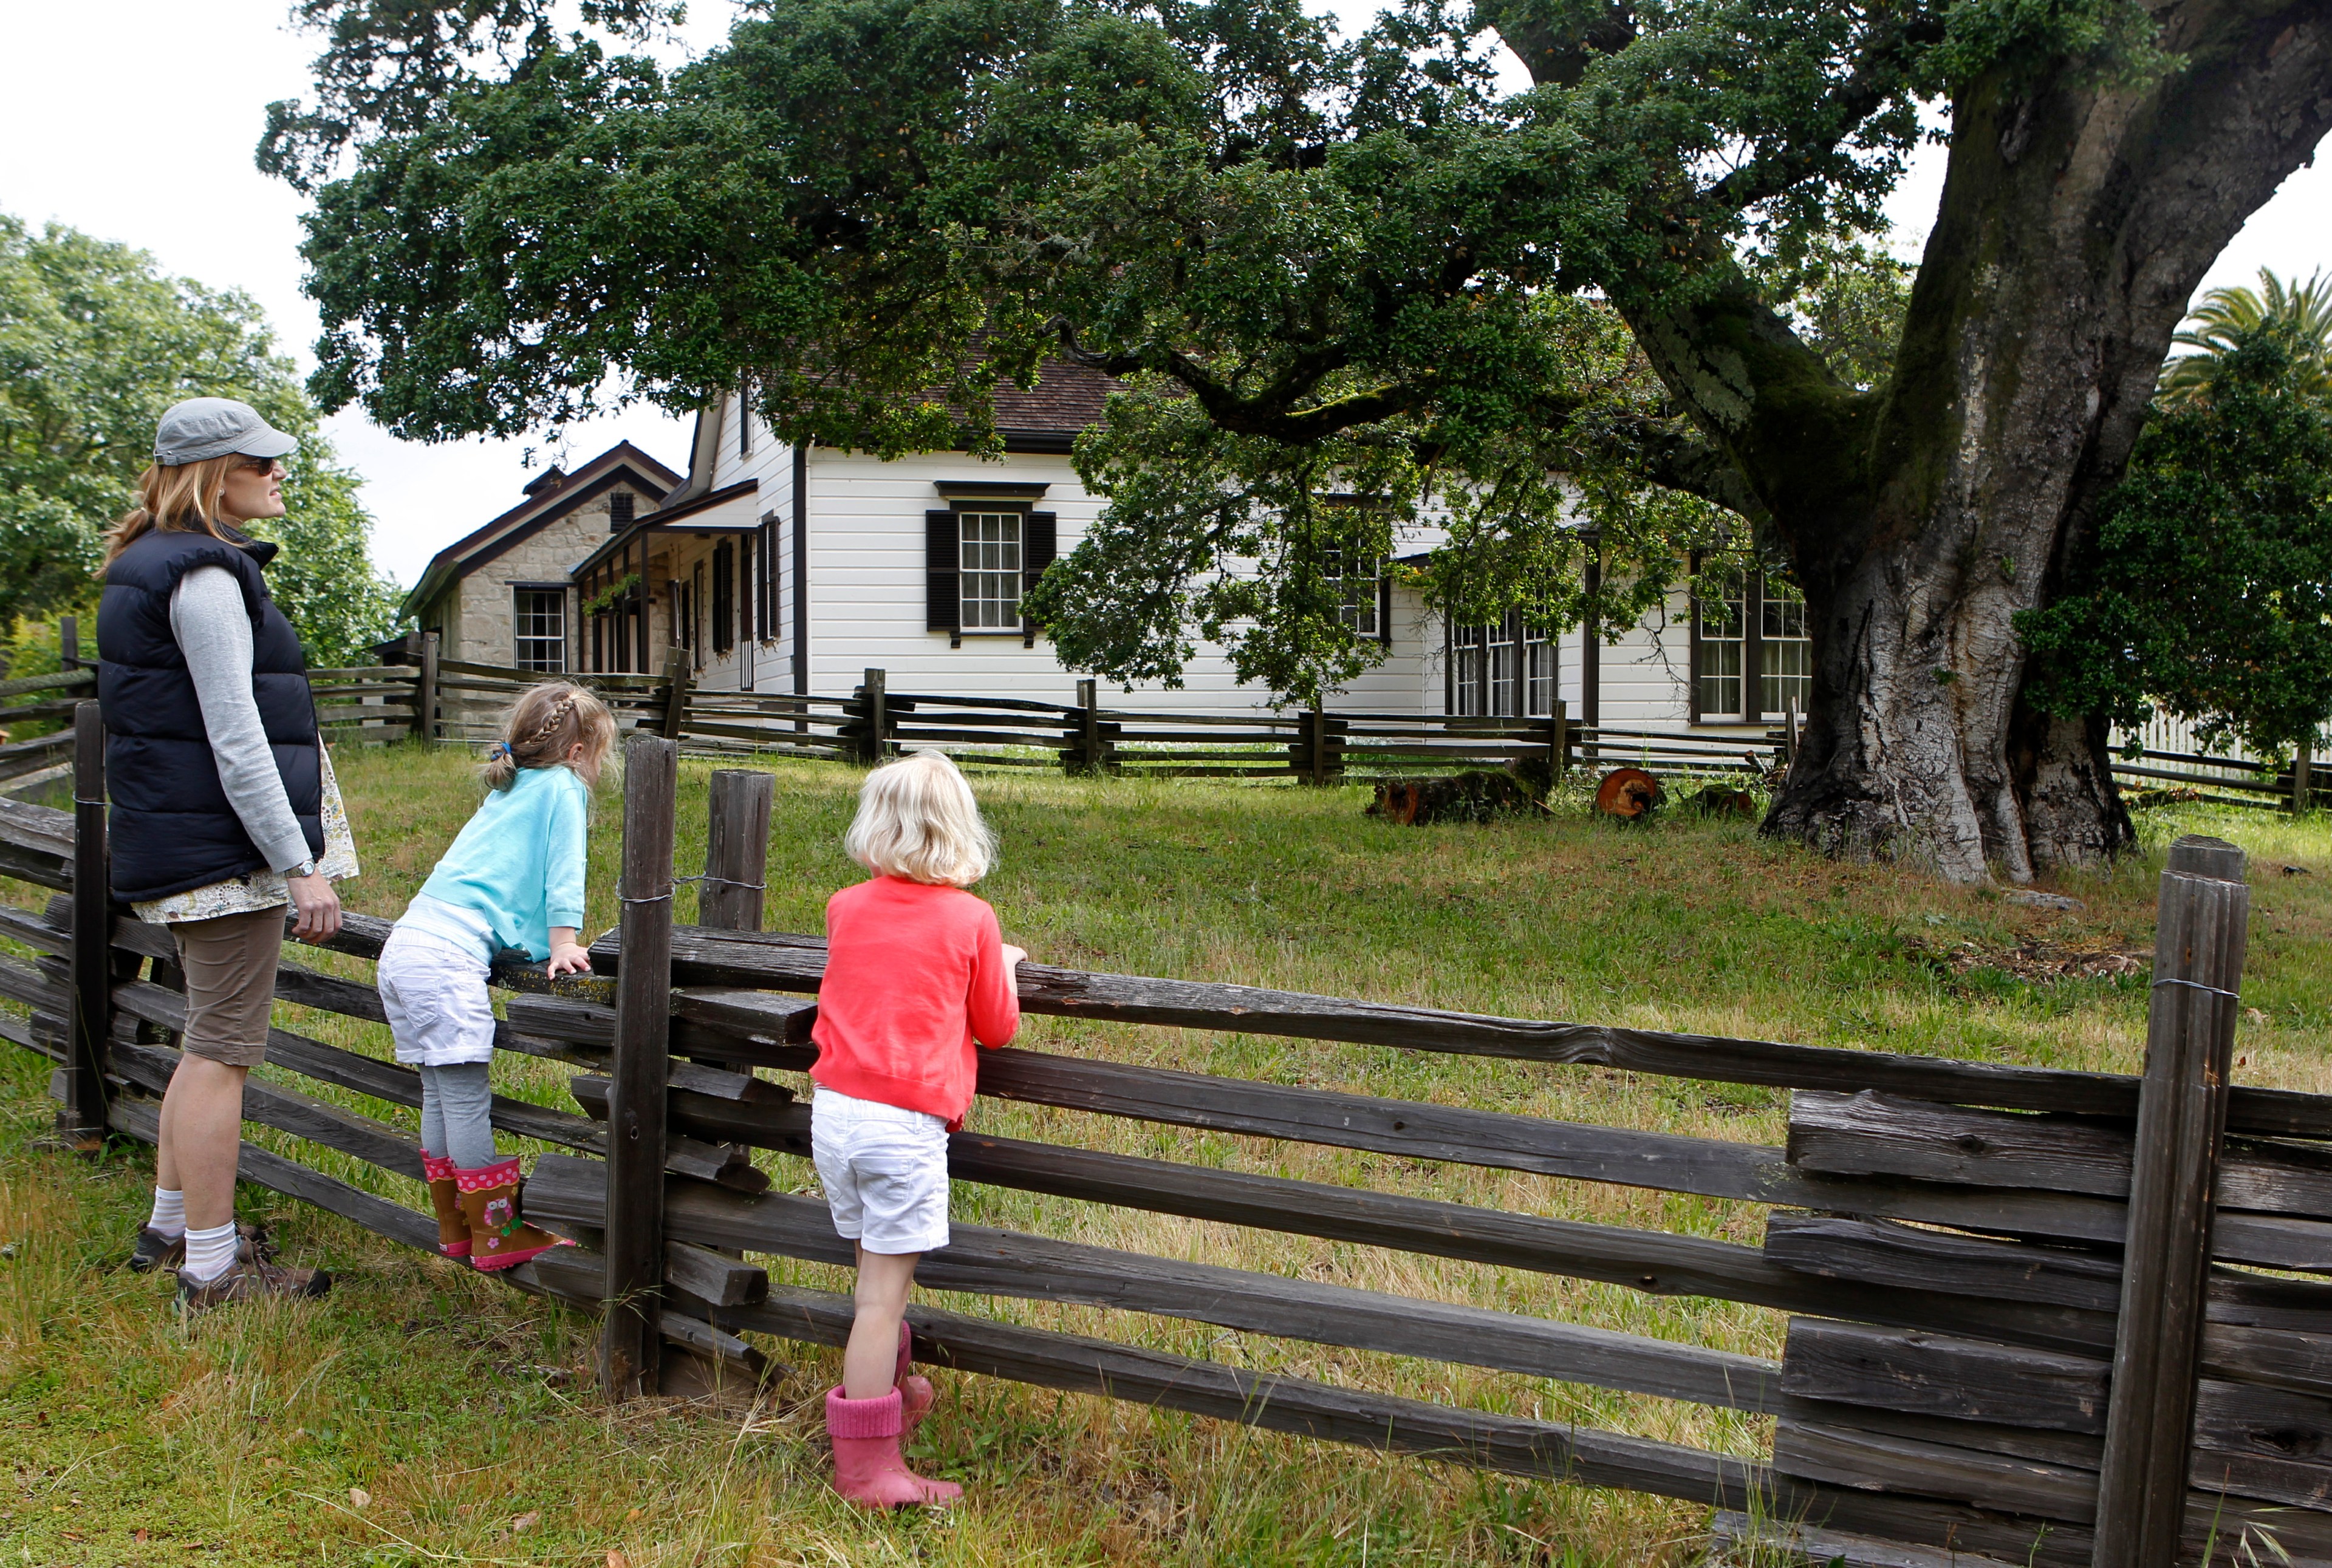 A woman and two children look over a wooden fence at a white historic house and a large tree.